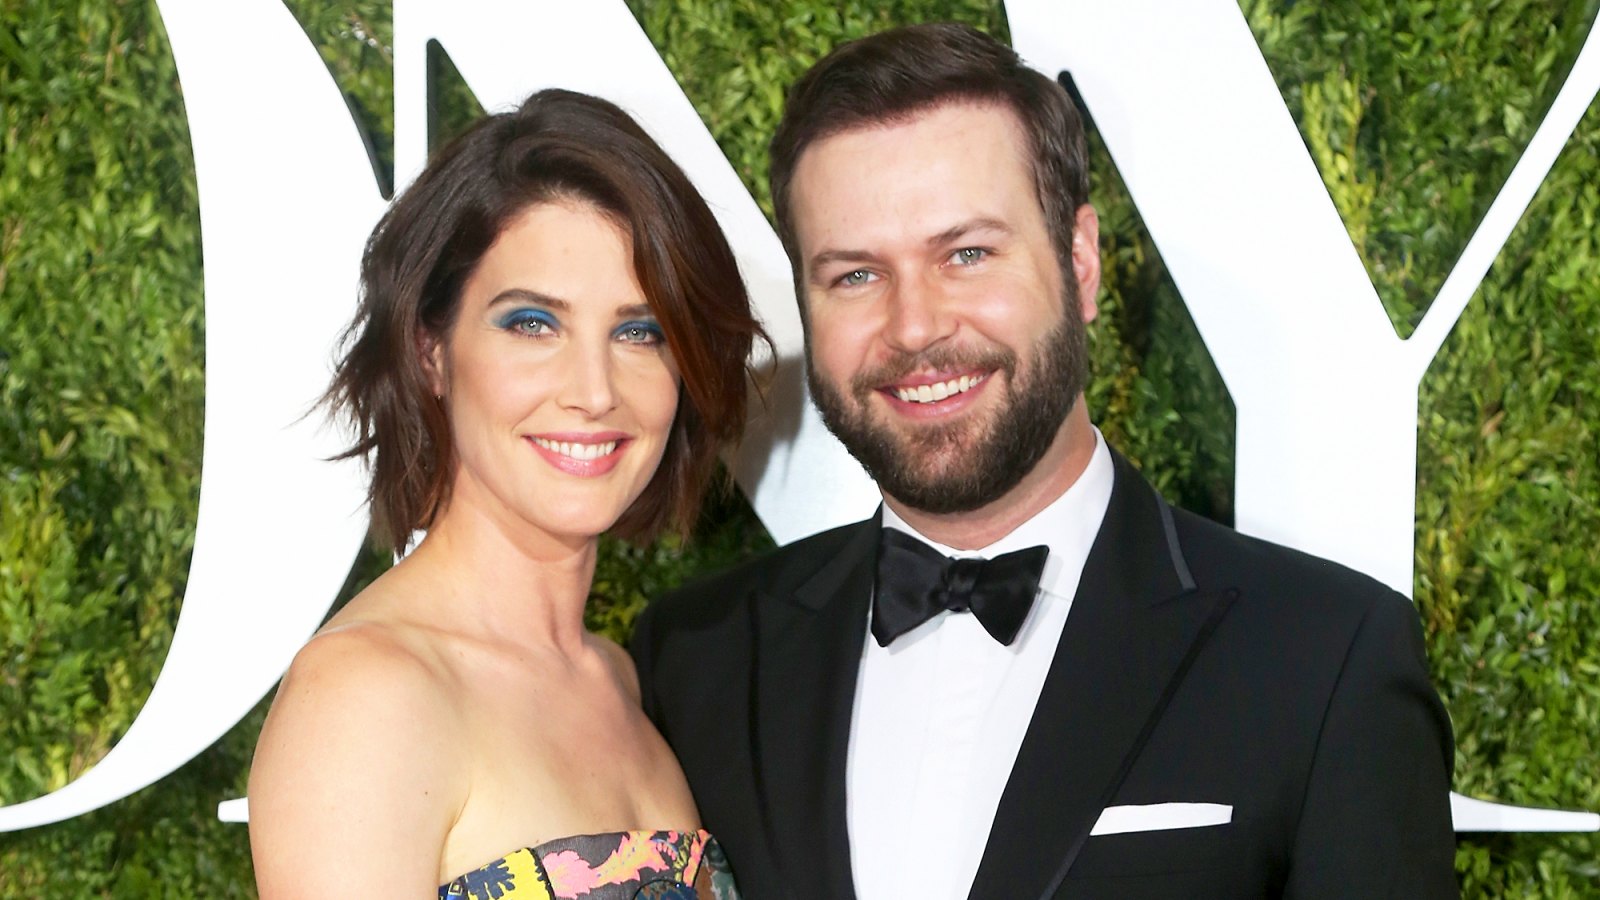 Cobie Smulders and Taran Killam attend the 71st Annual Tony Awards at Radio City Music Hall on June 11, 2017 in New York City.